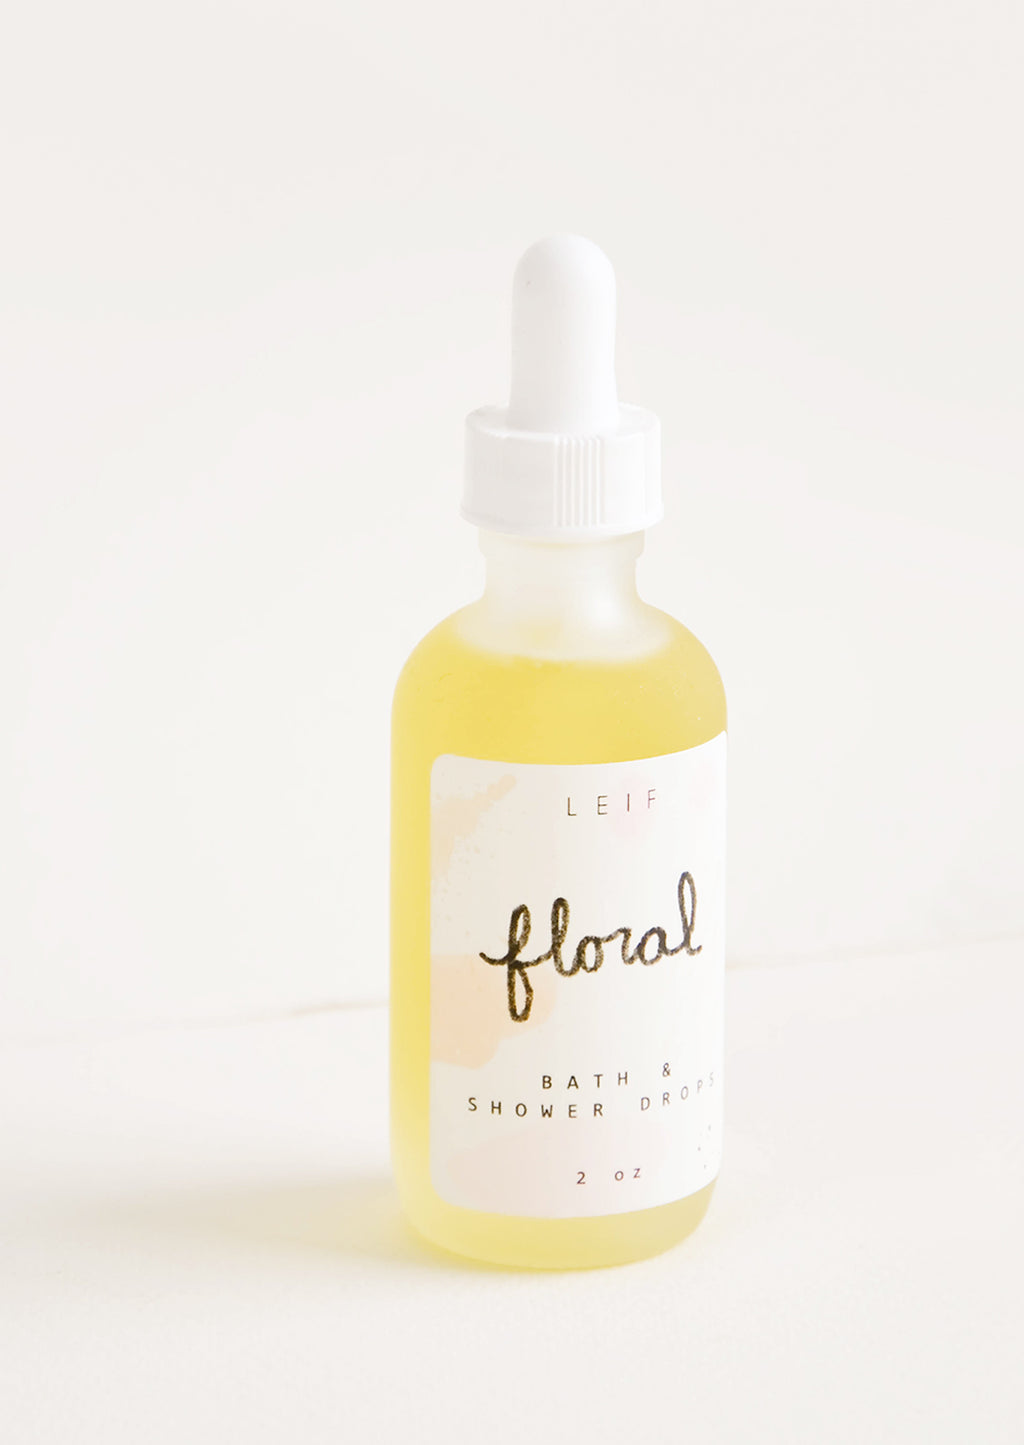 Floral: A small frosted glass dropper bottle with a white lid and label reading "floral" filled with a pale yellow liquid.